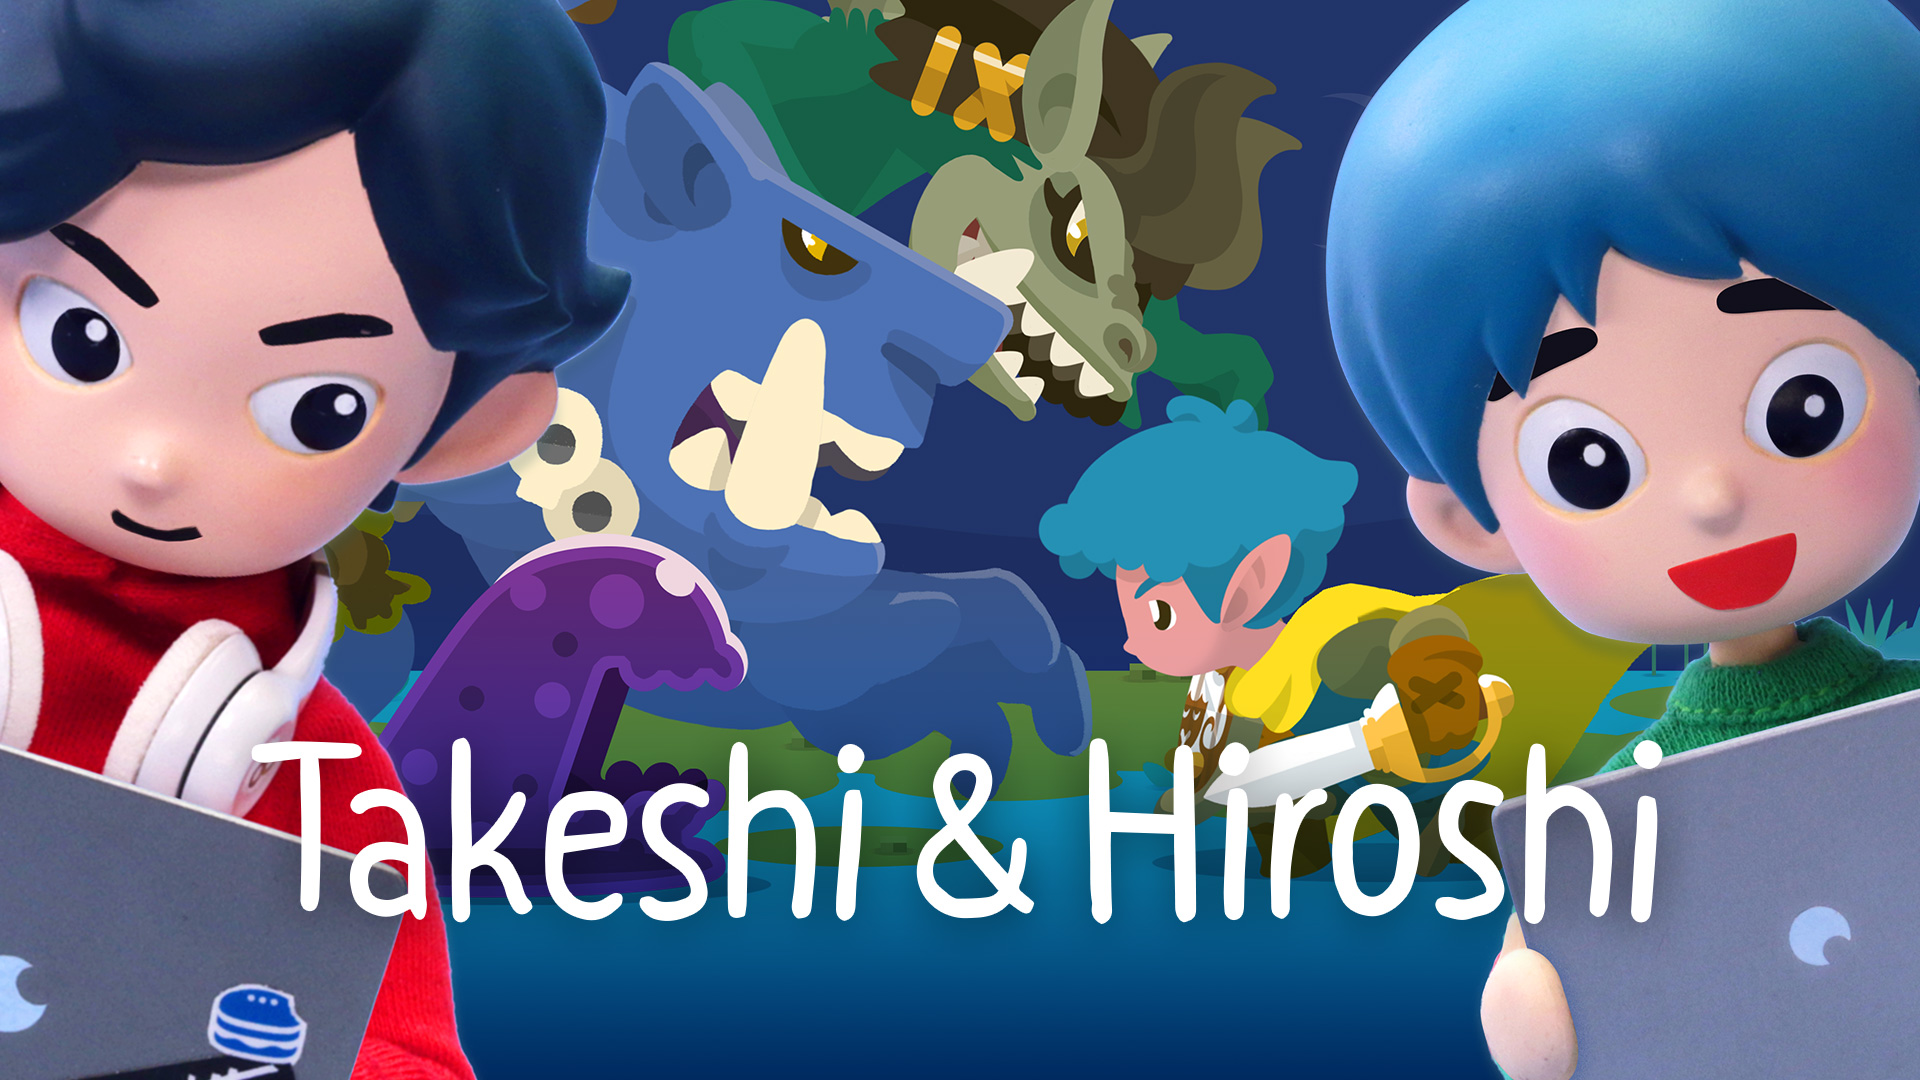 Takeshi and Hiroshi is wholesome RPG goodness